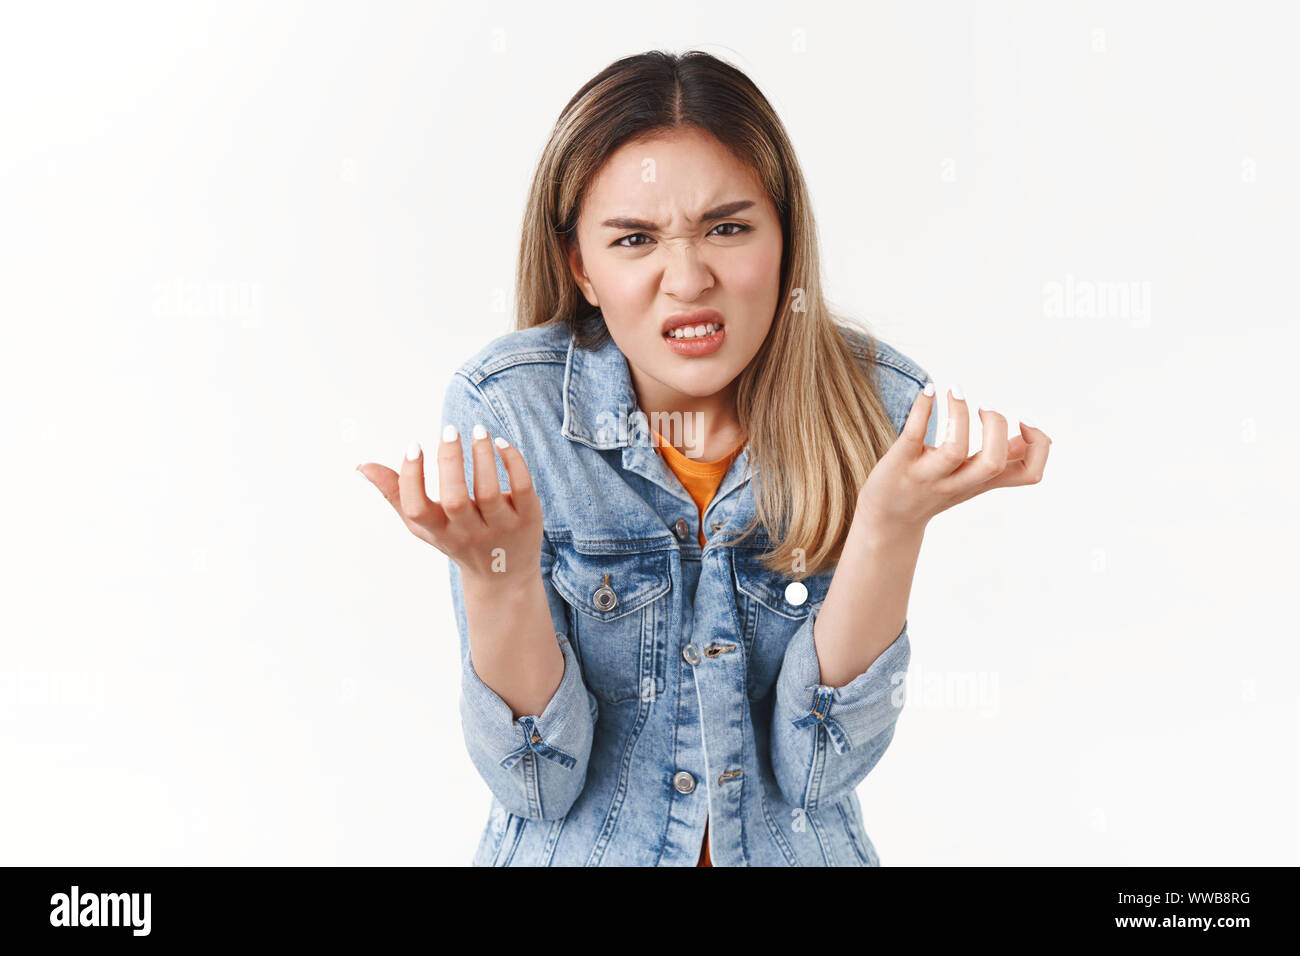 Girl swearing cursing cruel unfair life losing chance participate event. Upset intense annoyed hateful asian blond girl cringing grimacing anger Stock Photo